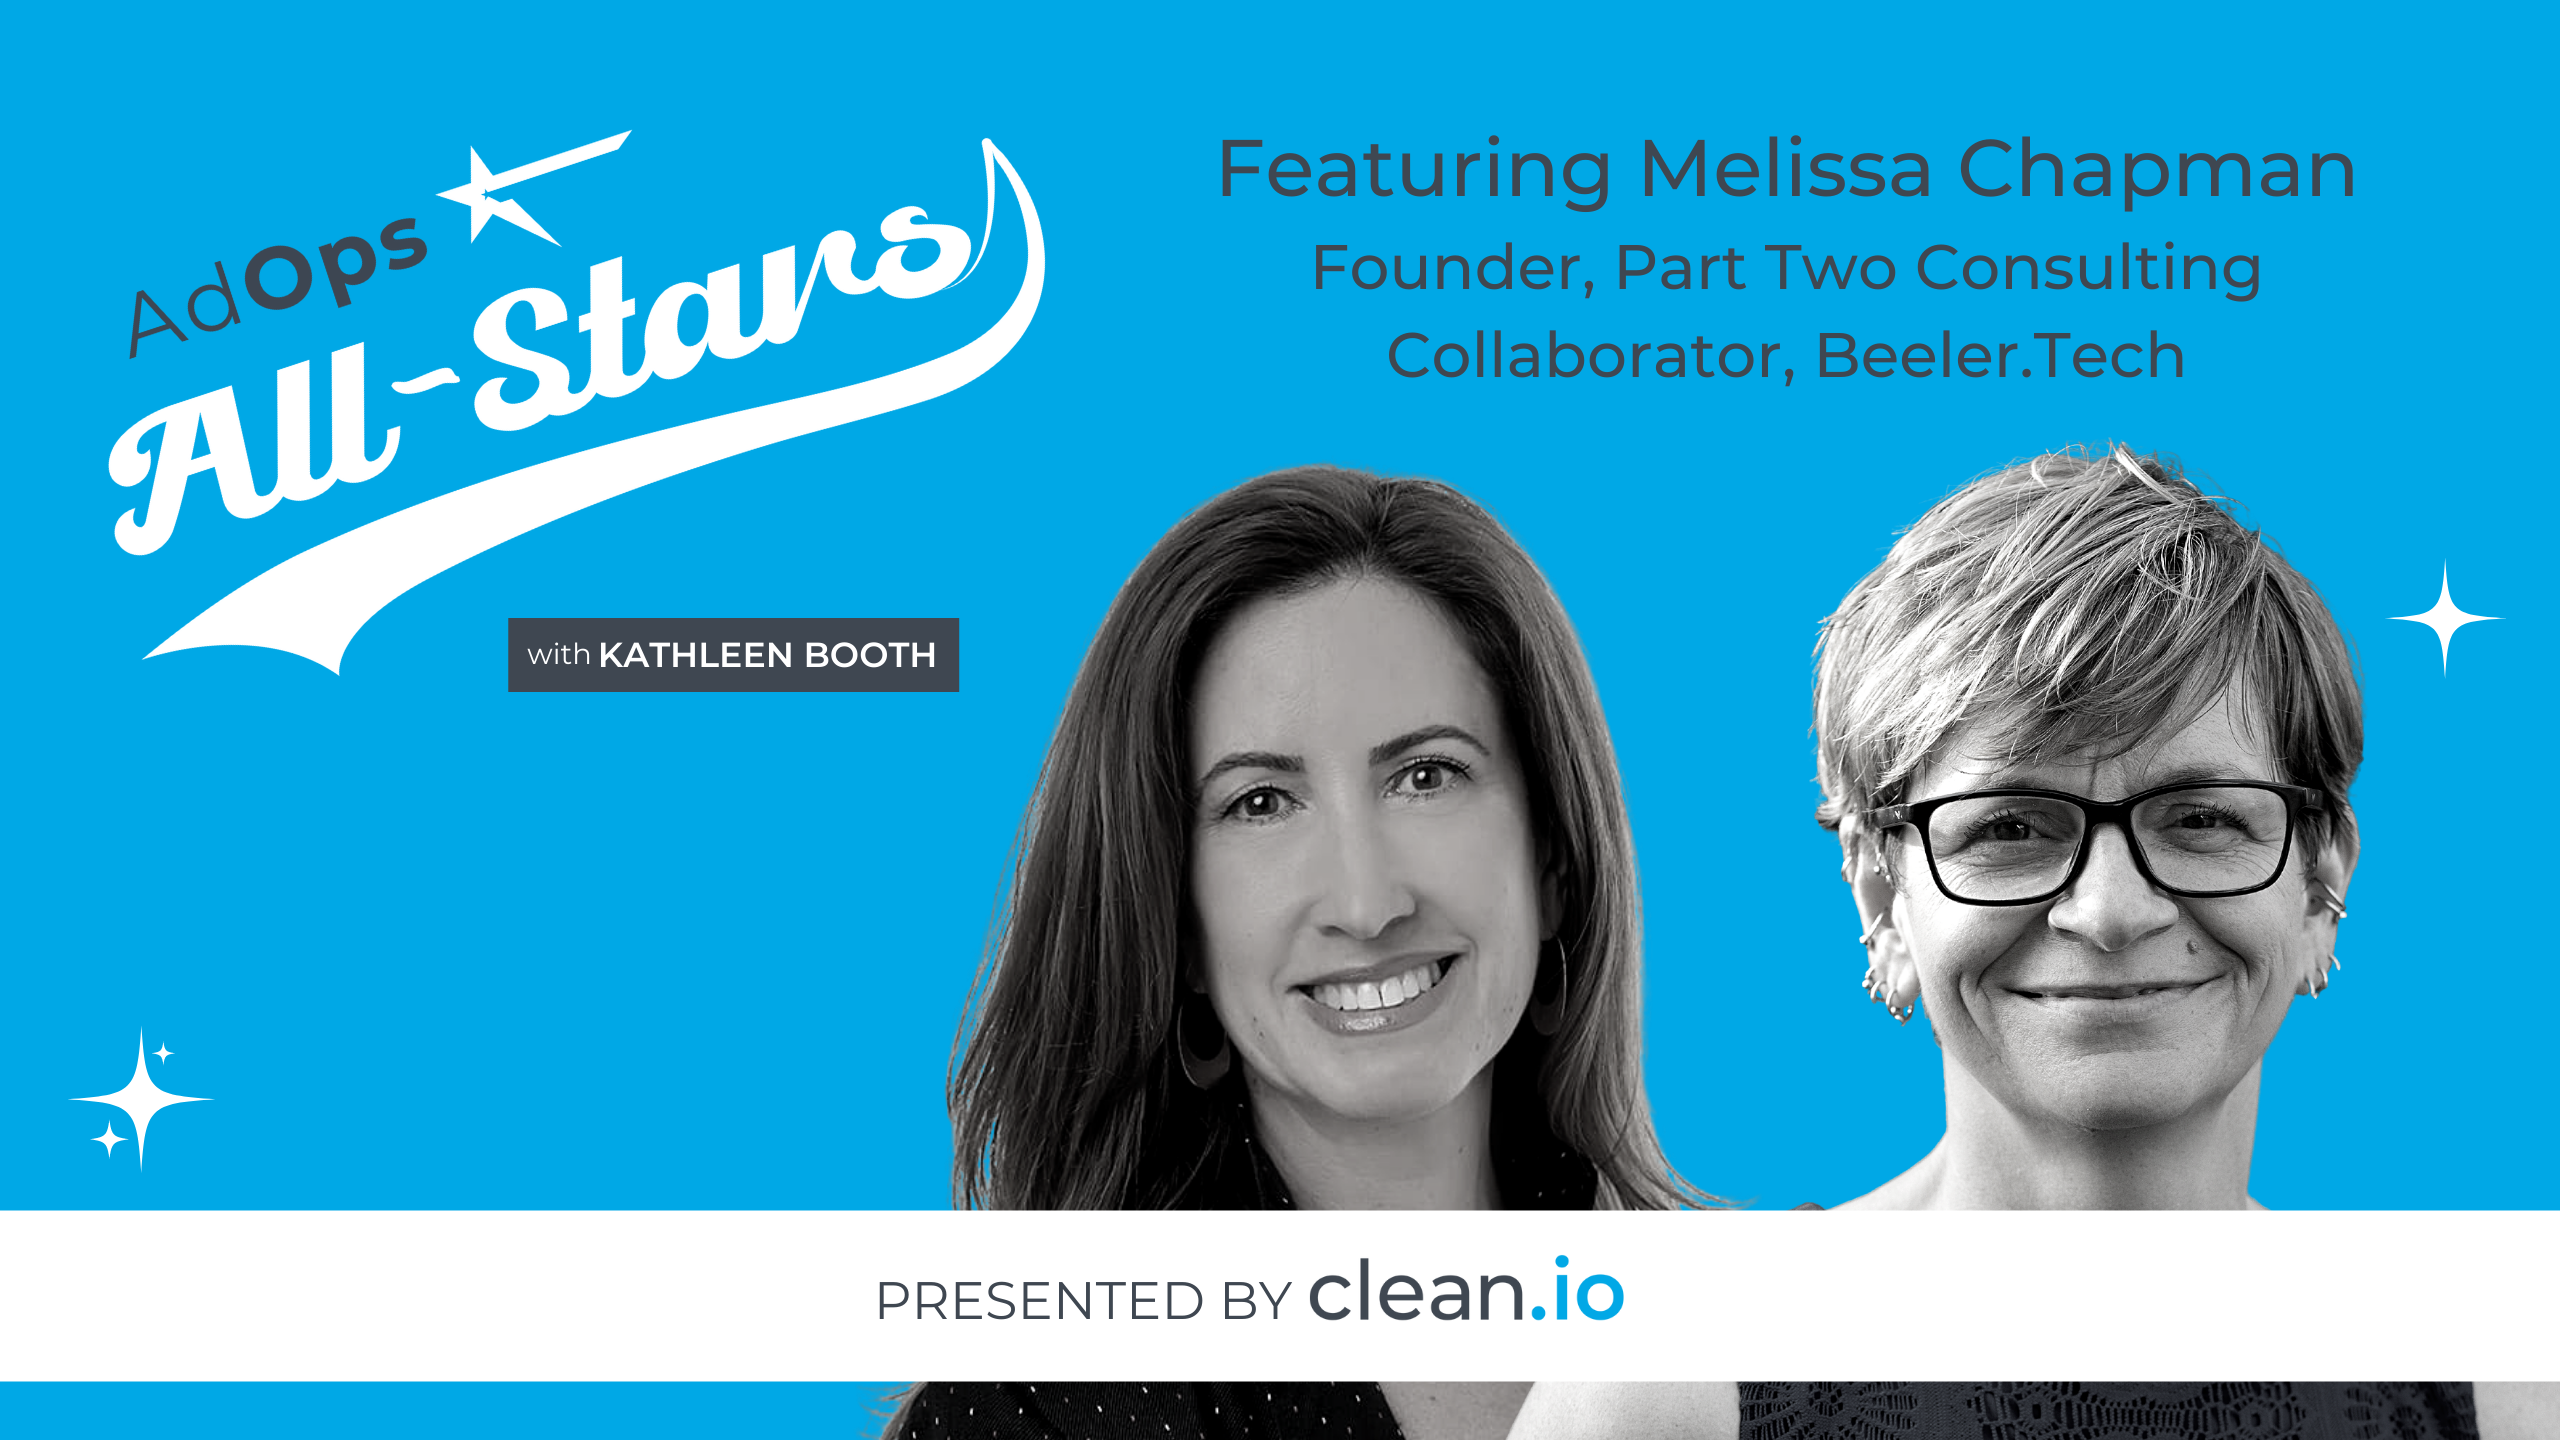 Ad Ops All Stars: Melissa Chapman, Part Two Consulting